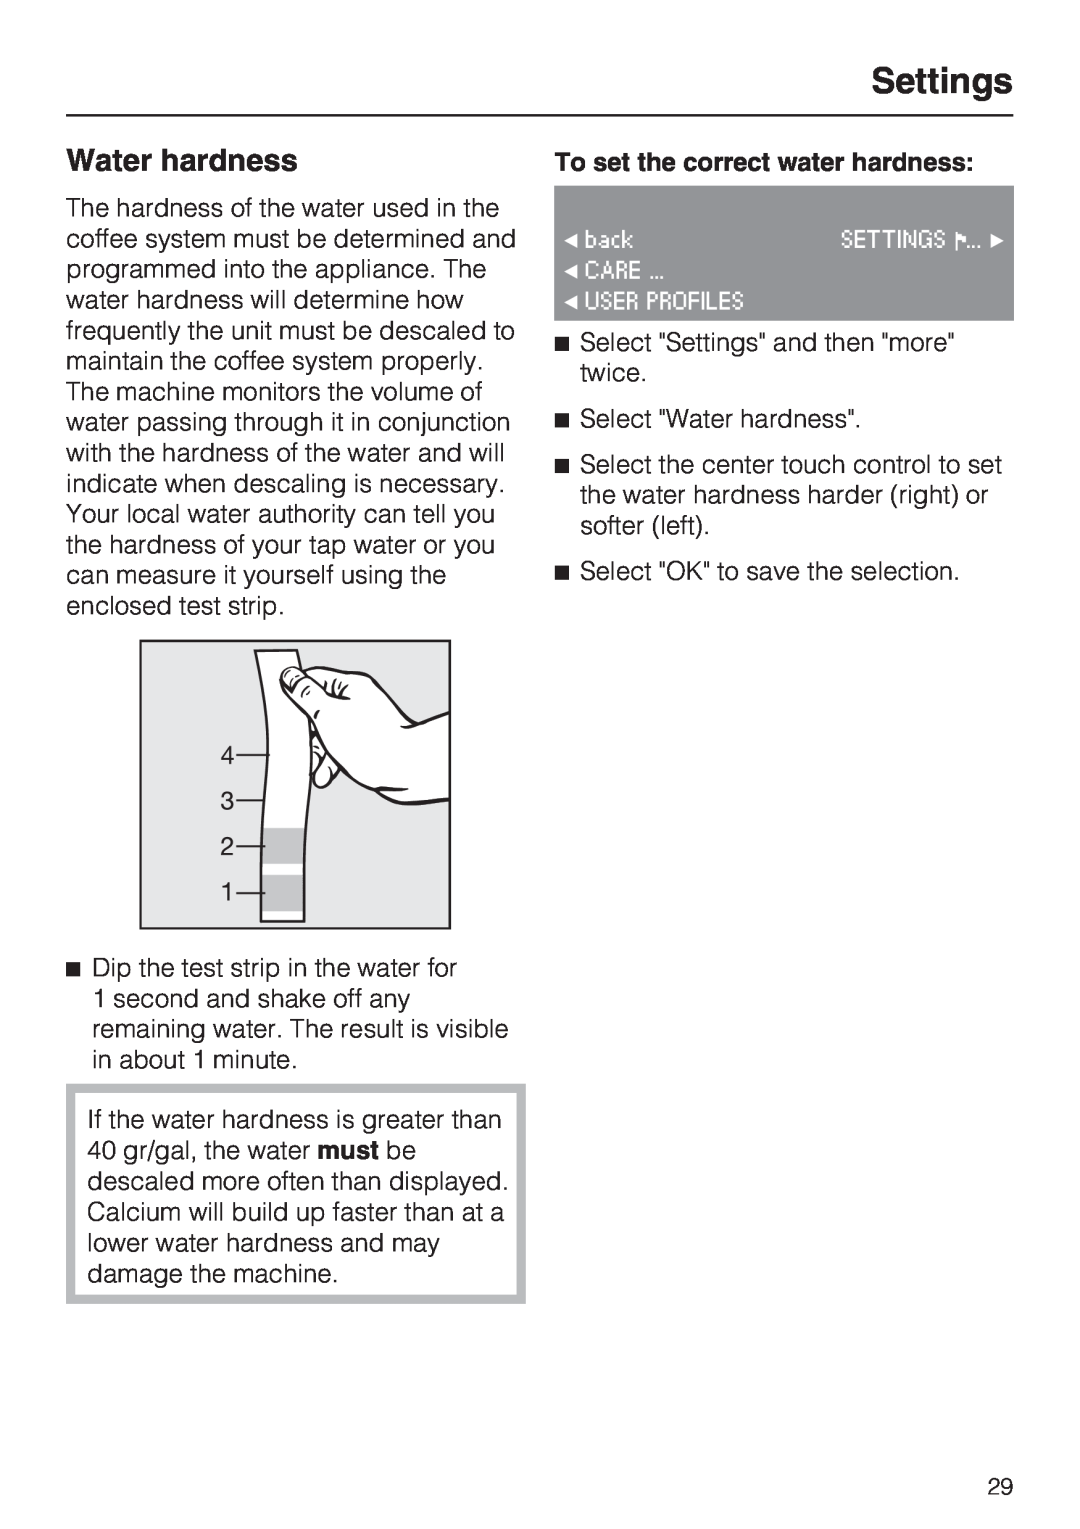 Miele CVA4075 installation instructions Water hardness, To set the correct water hardness, Settings 